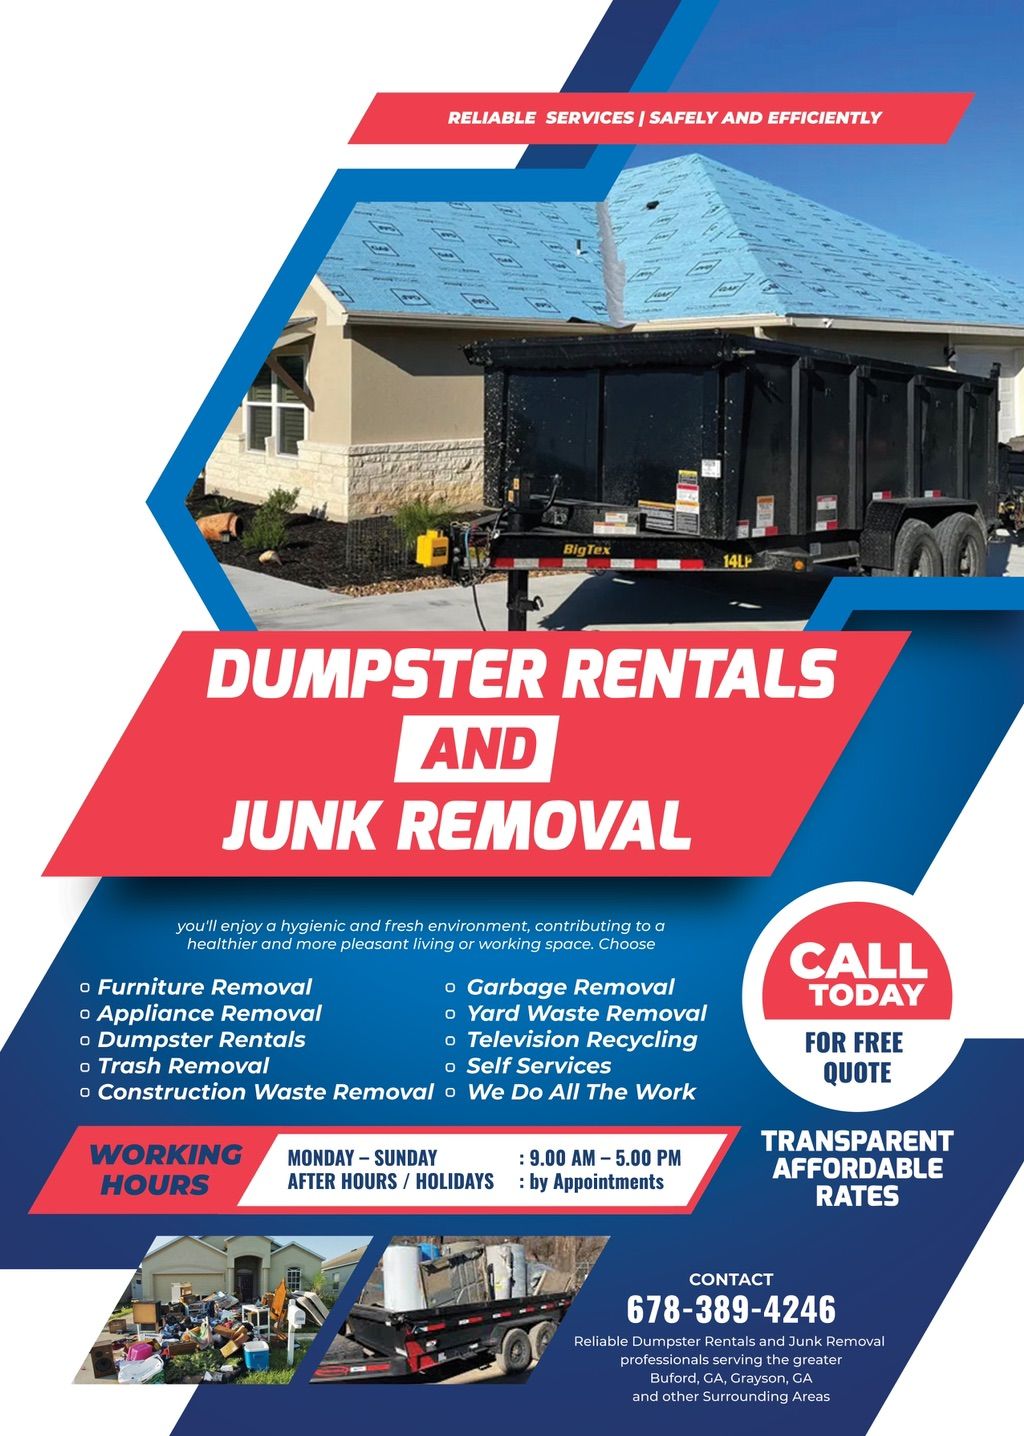 Daddy&Sons dumpster rental and junk removal